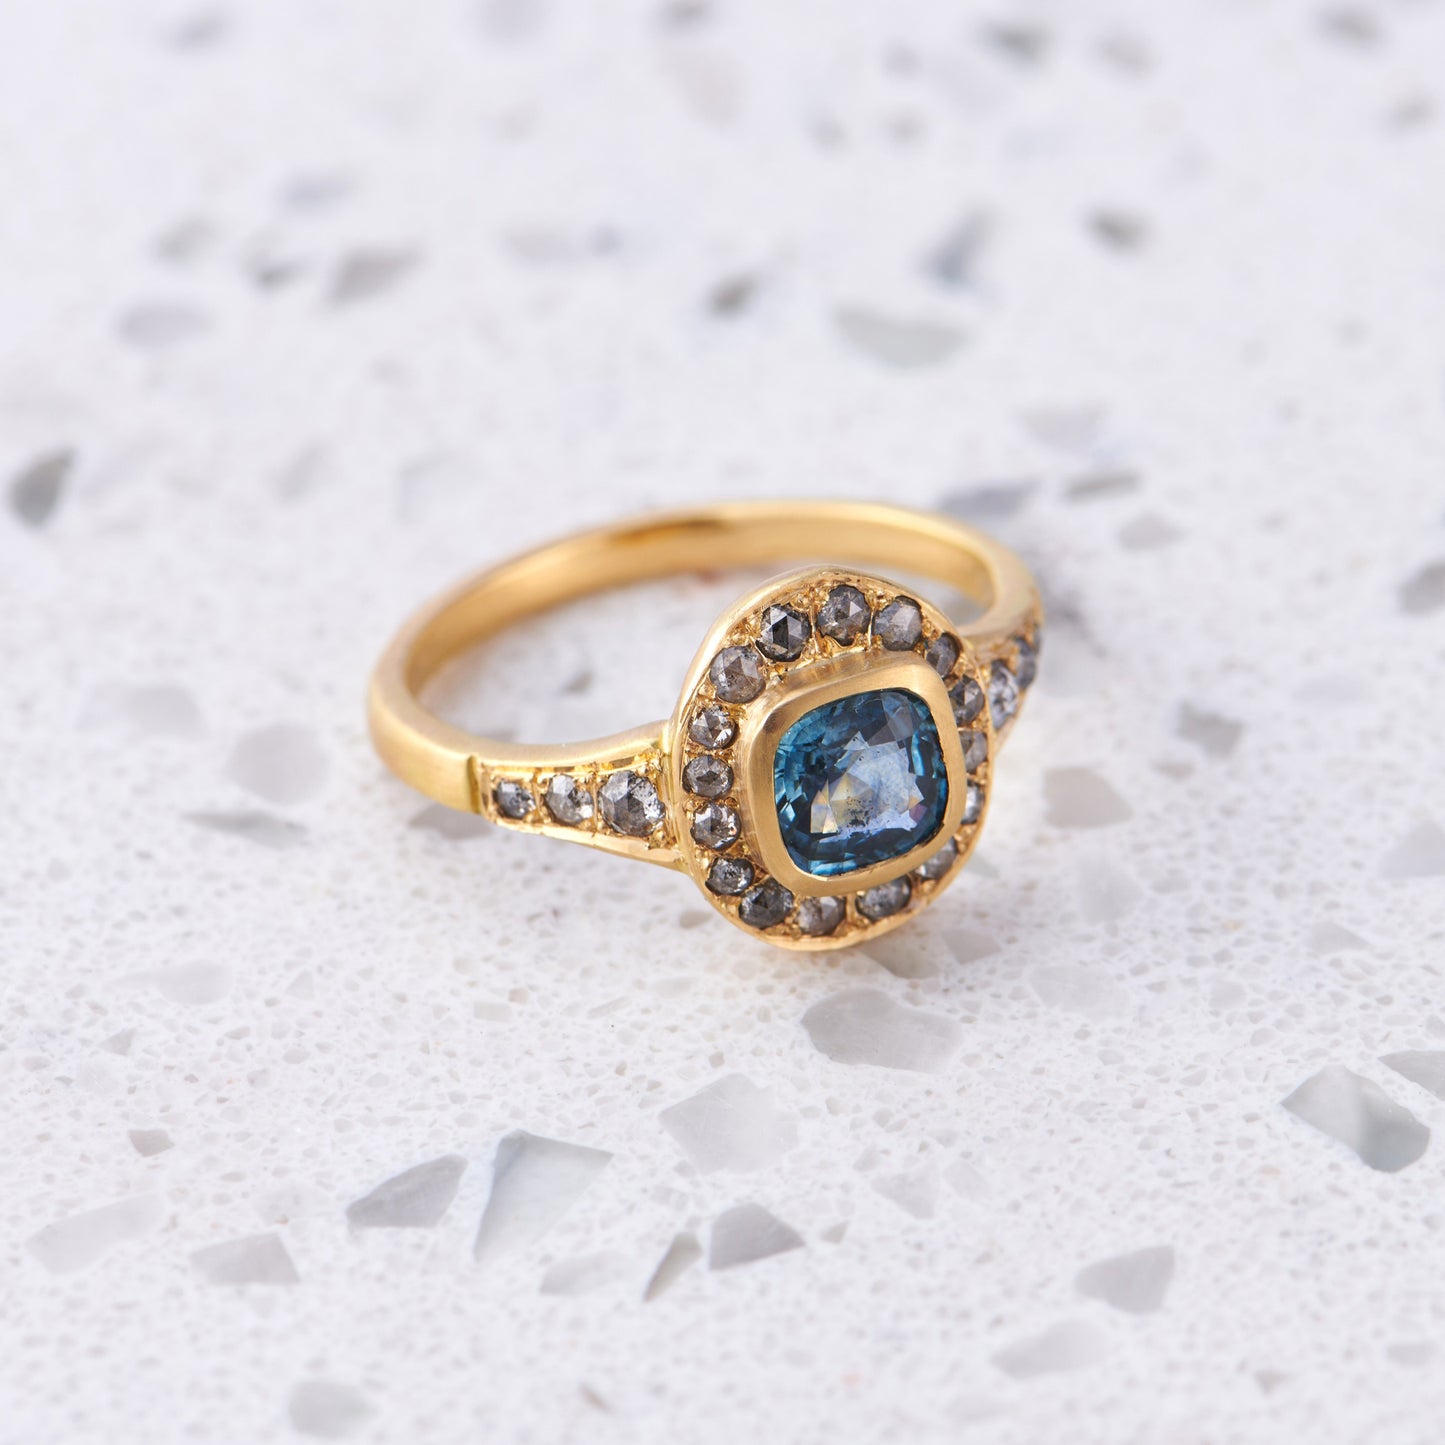 Montana Sapphire Roman Salt and Pepper Ring in 18ct Yellow Gold, Size R and a half (In Stock)